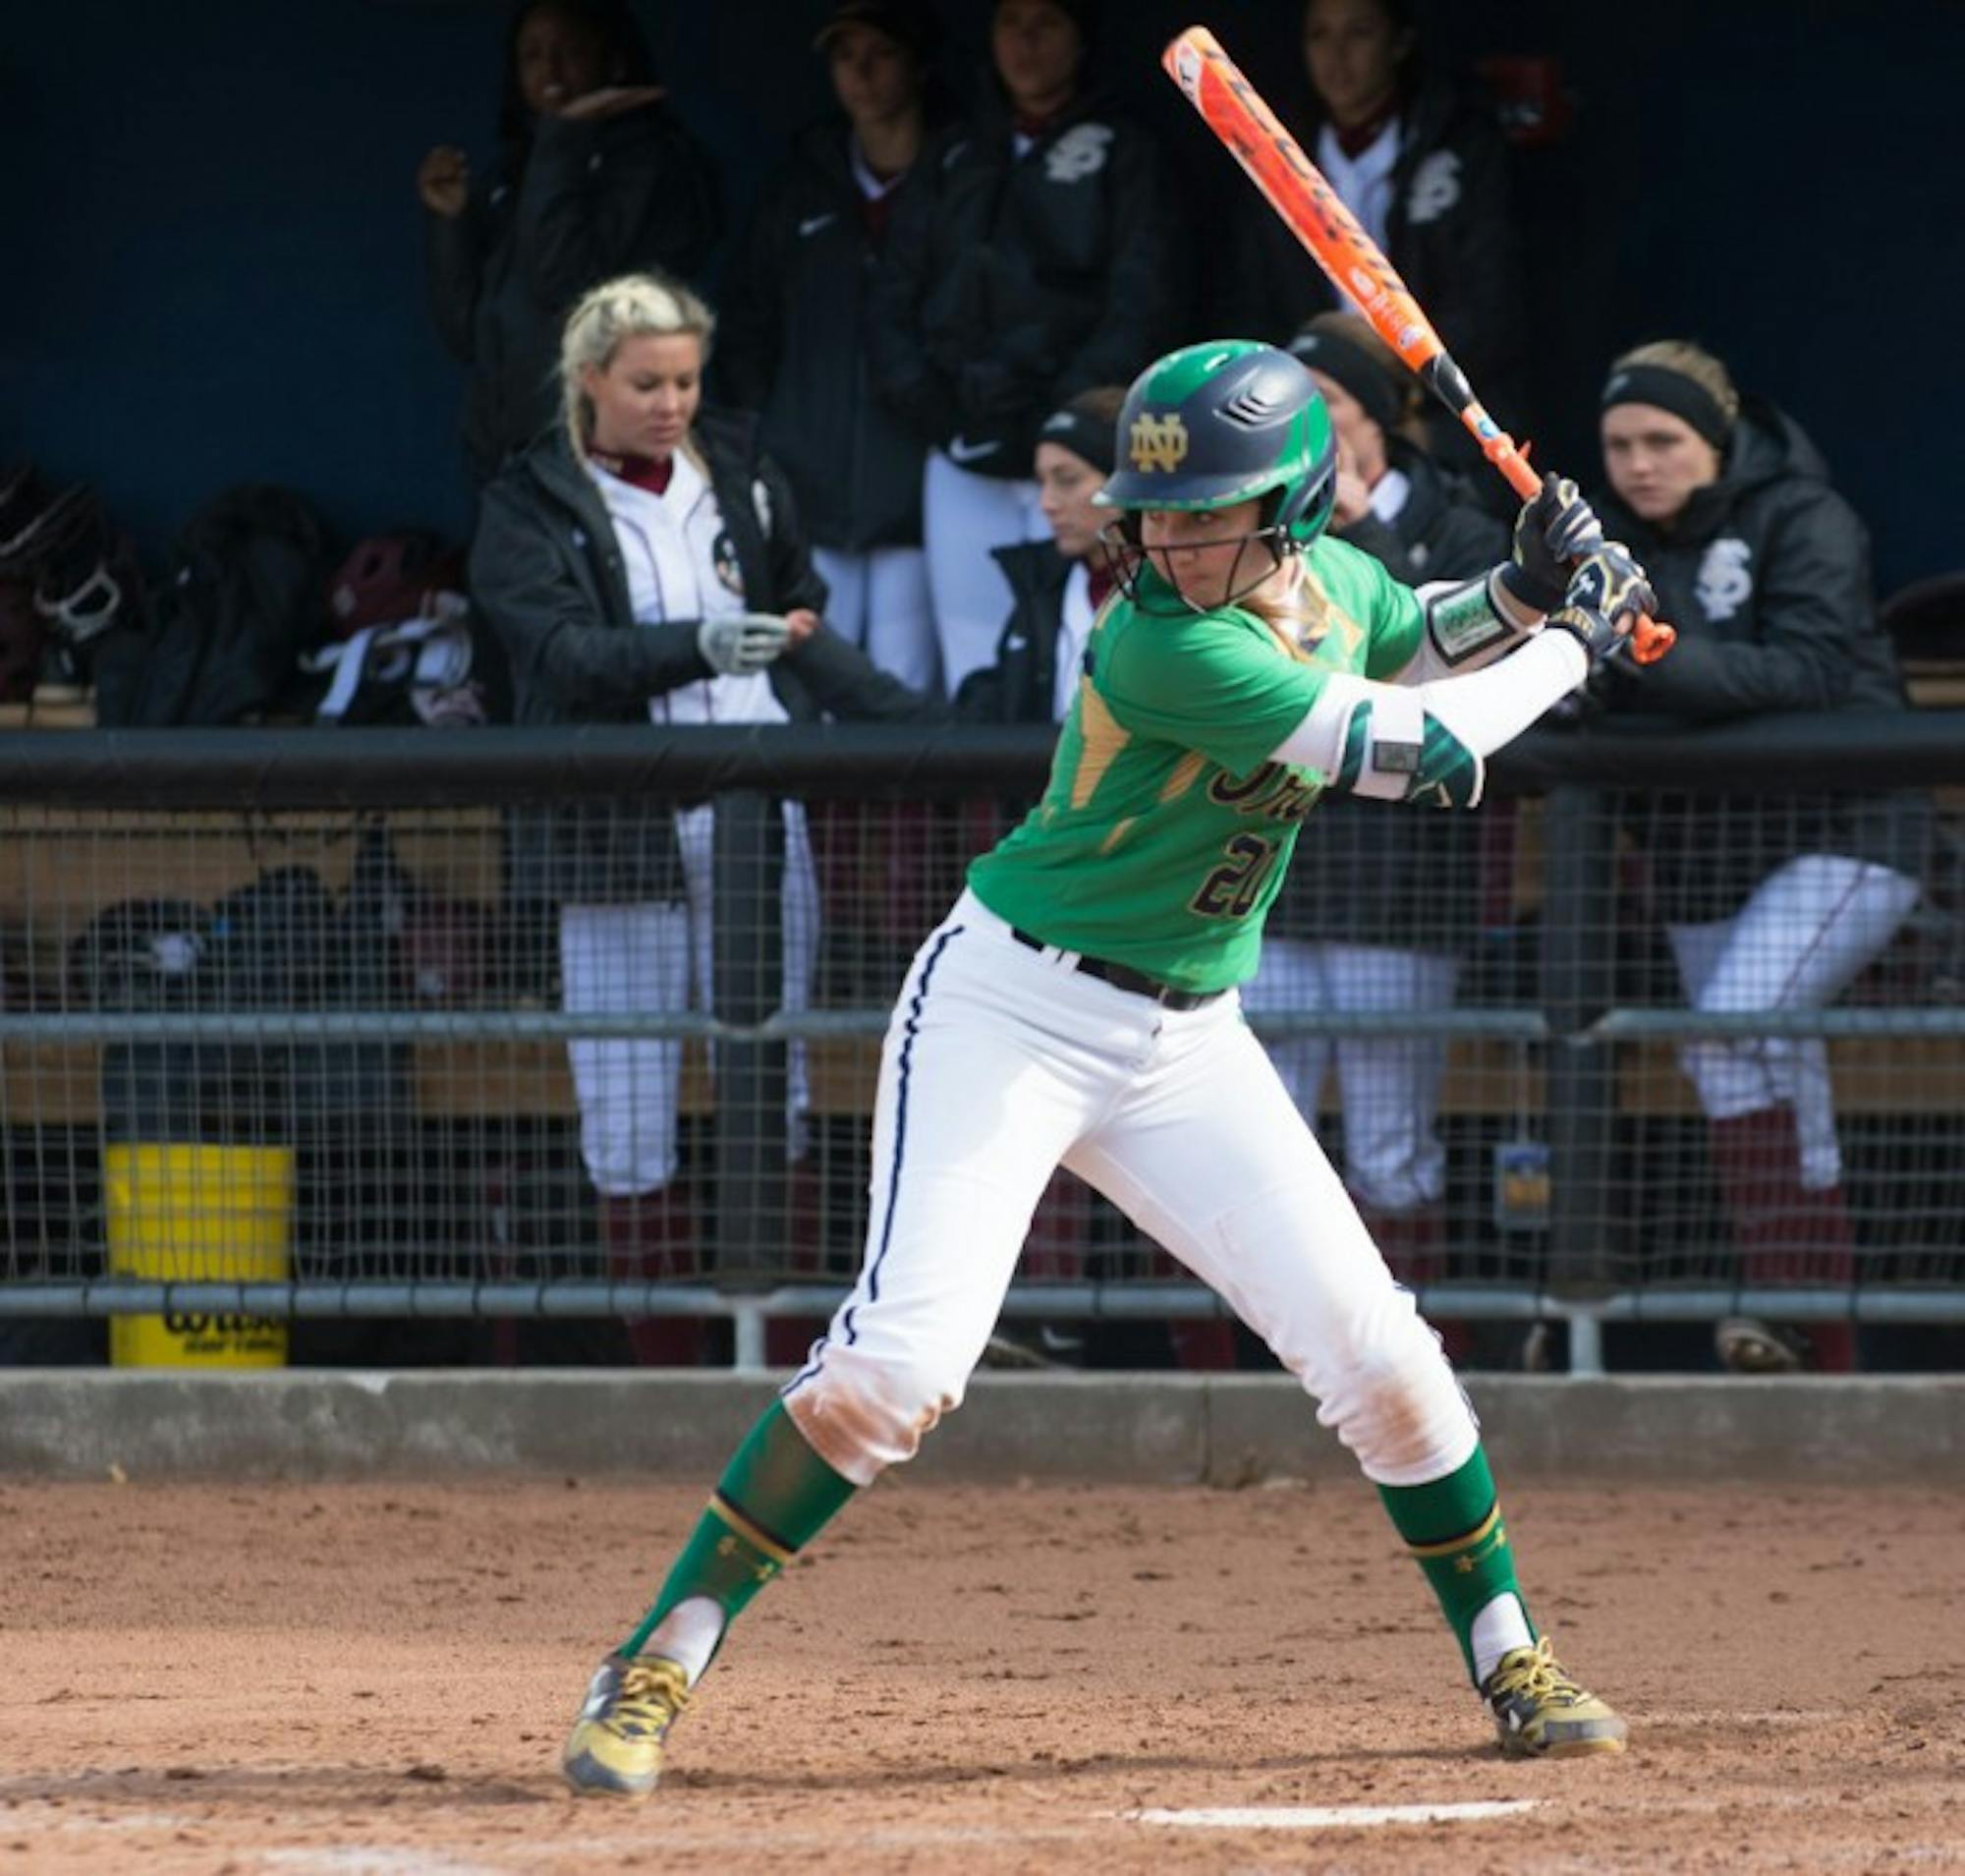 Irish sophomore infielder Morgan Reed waits for the pitch during Notre Dame’s 5-4 victory over Florida State on April 3. Reed bunted a single during the fifth inning when the Irish first took the lead.